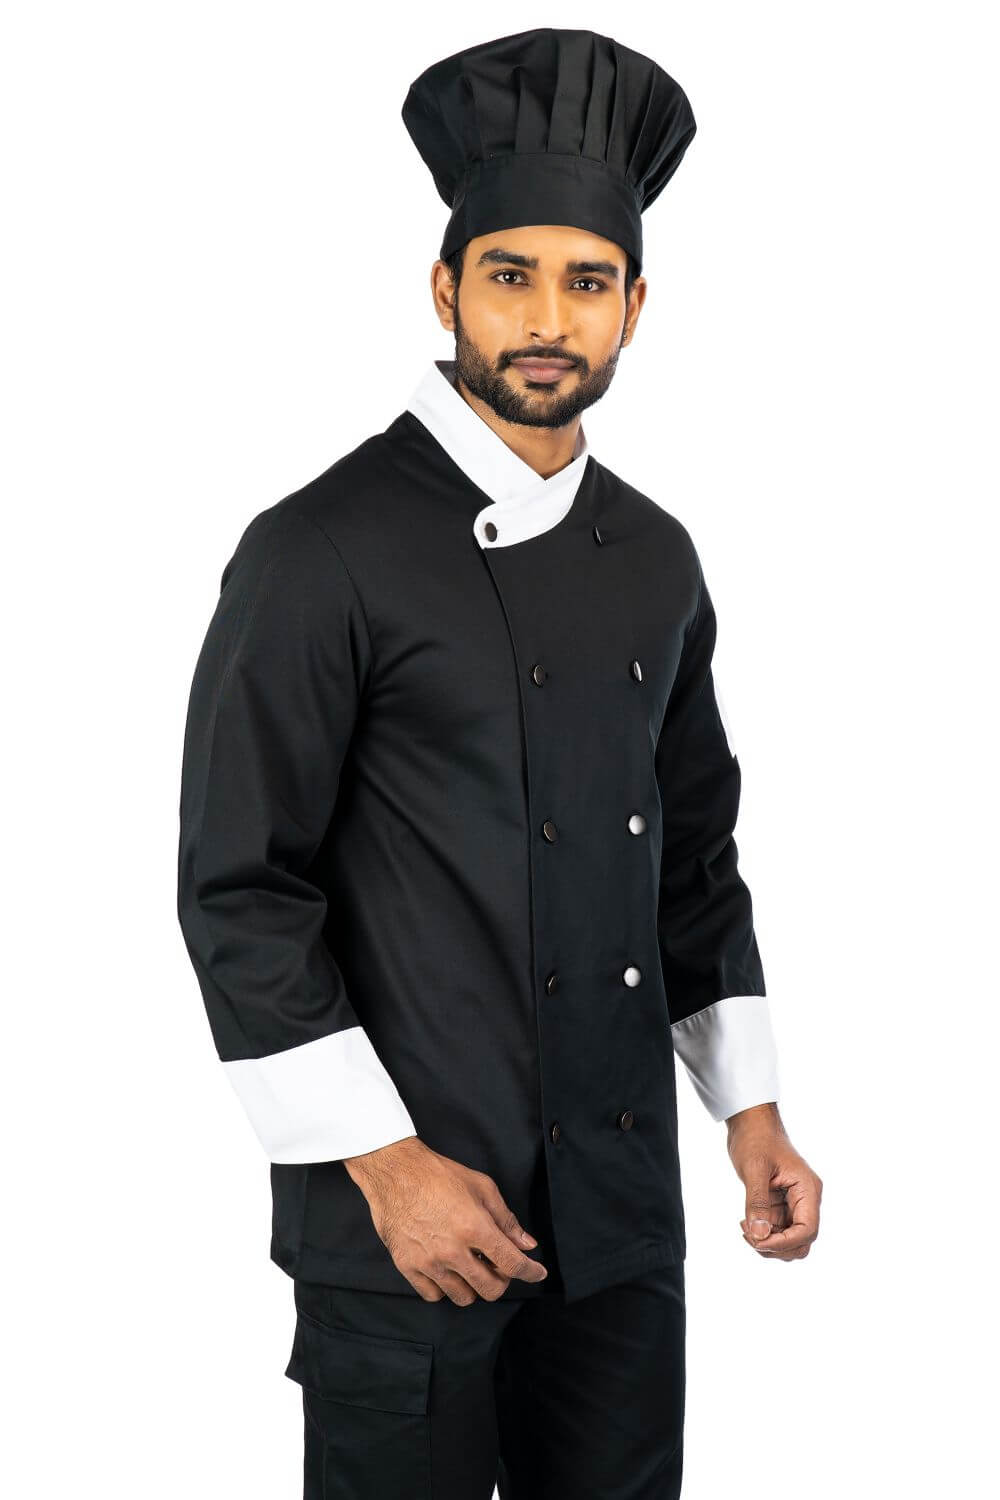 Mandarin Collar and Cuffs With contrast fabrics Cotton Blend Black Chef Jacket